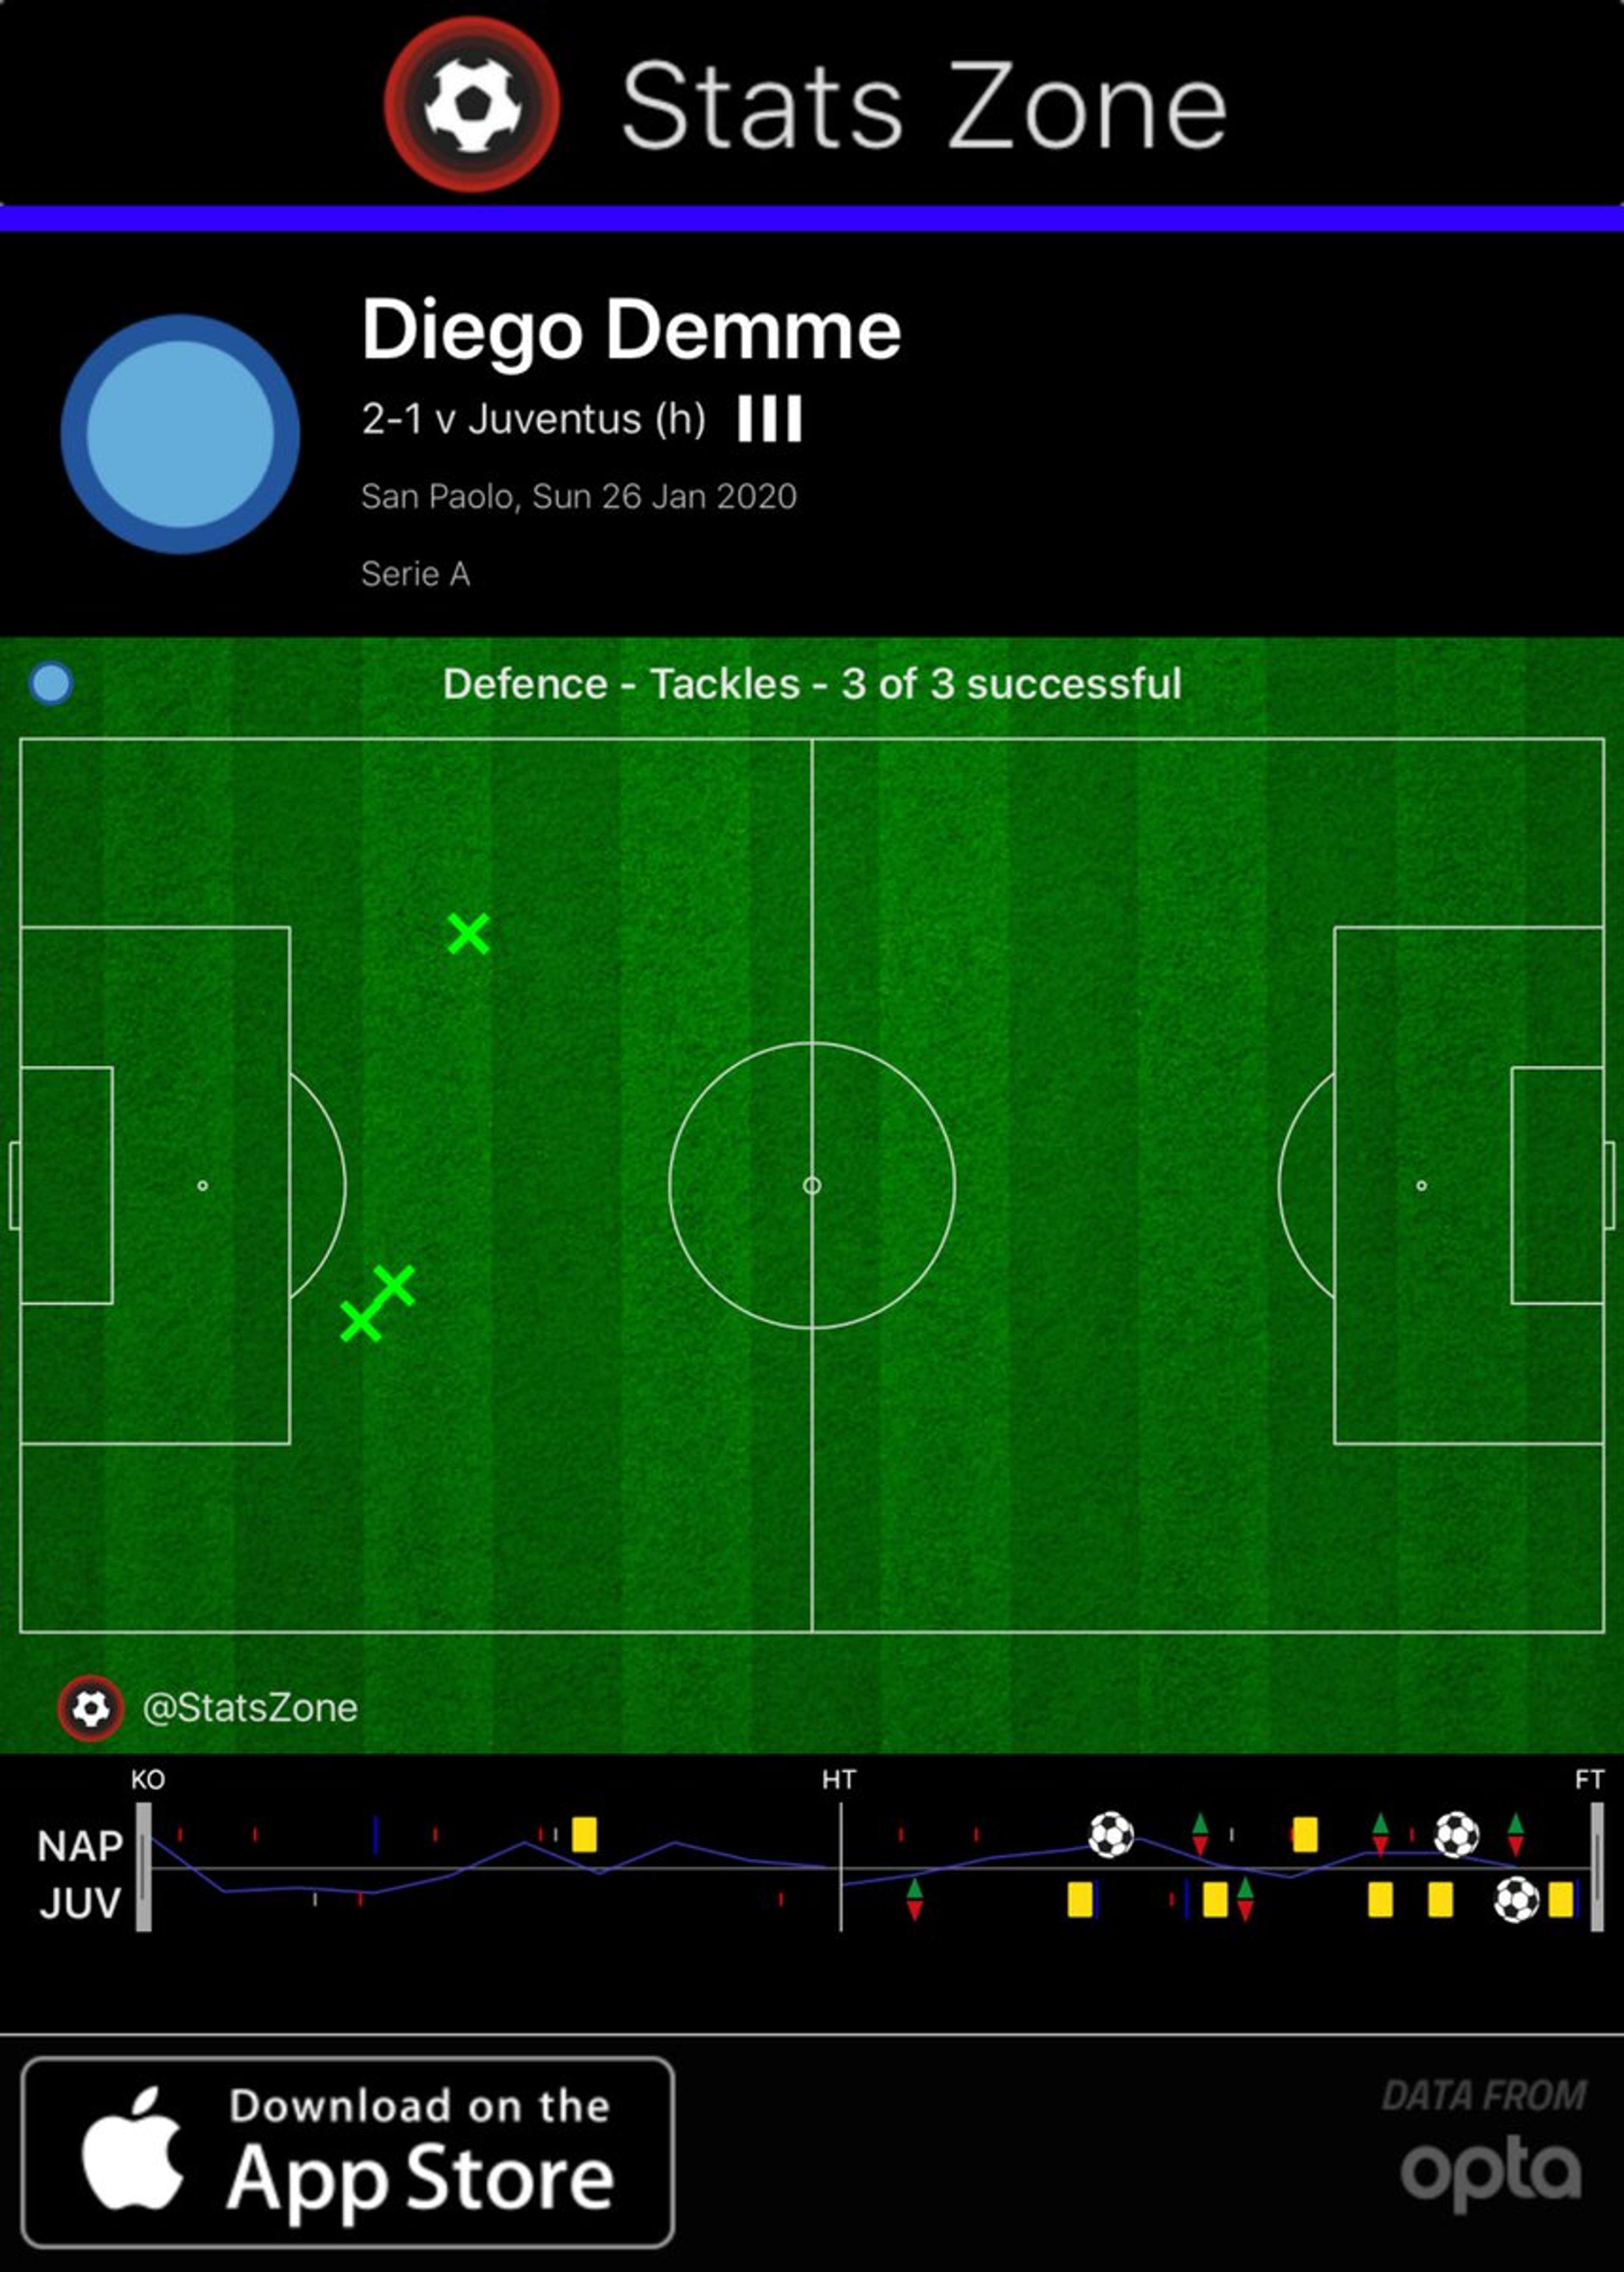 Diego Demme Tackles Map vs Juventus